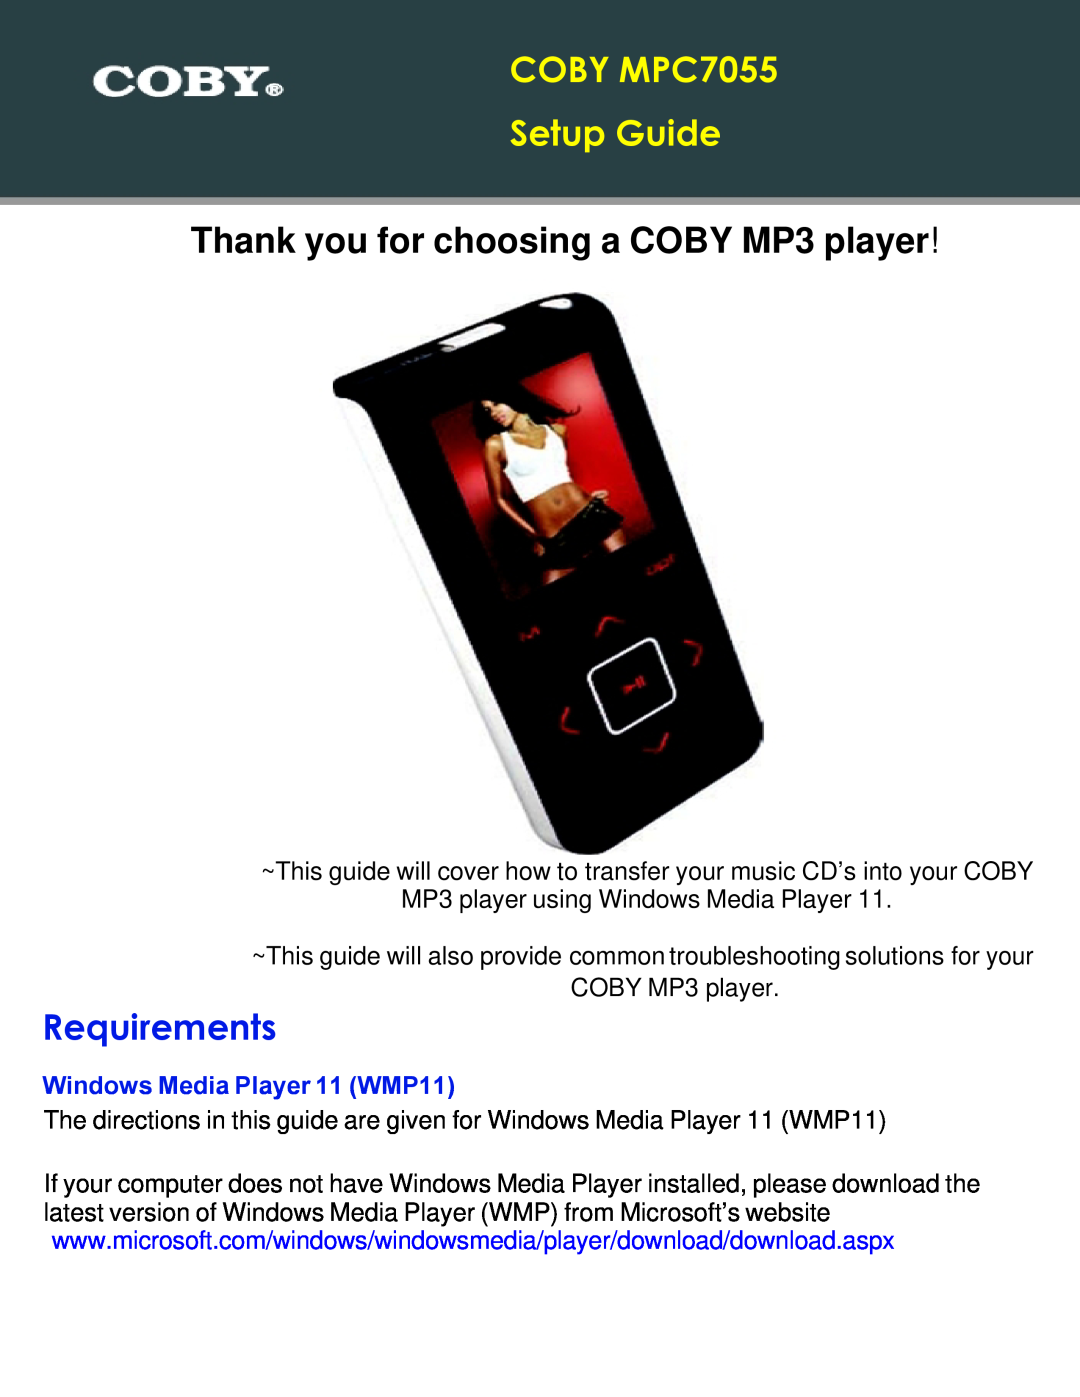 COBY electronic setup guide Requirements, COBY MPC7055 Setup Guide, Thank you for choosing a COBY MP3 player 